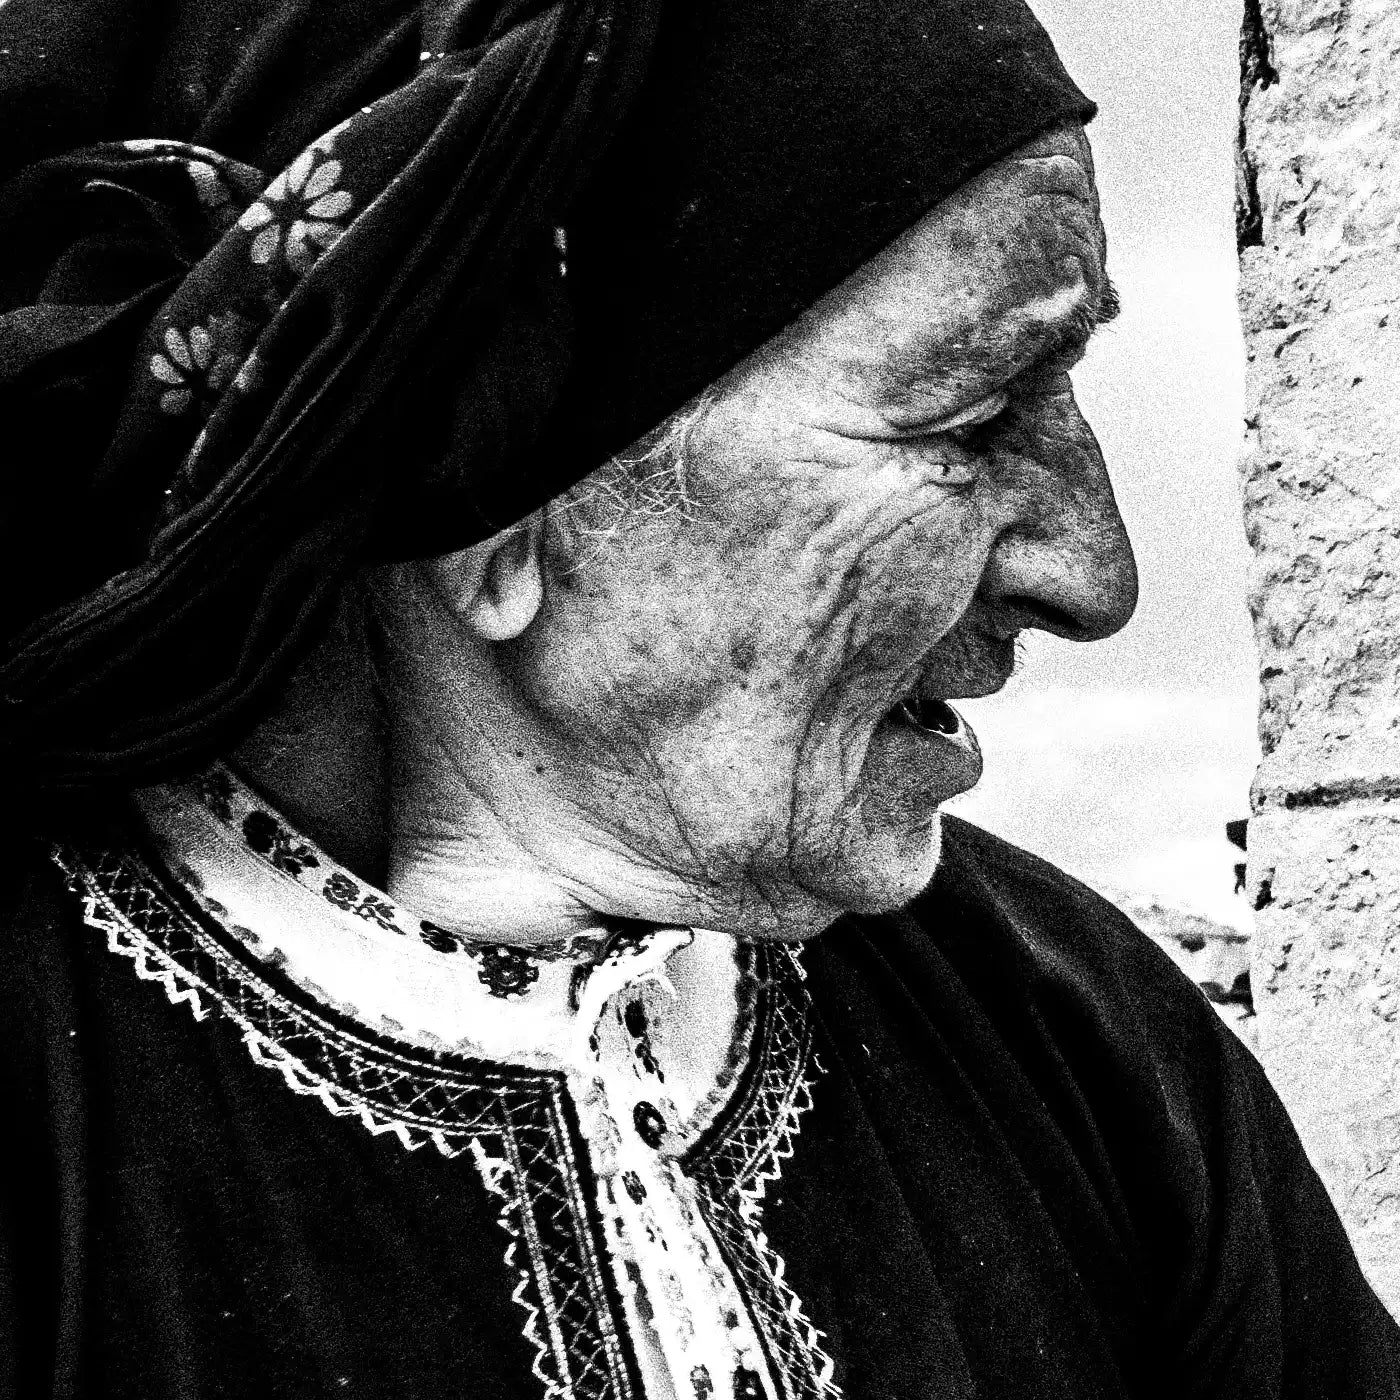 Black and White Photography Wall Art Greece | Woman spreading the fire inside wood oven in her traditional costume Olympos Karpathos by George Tatakis - detailed view